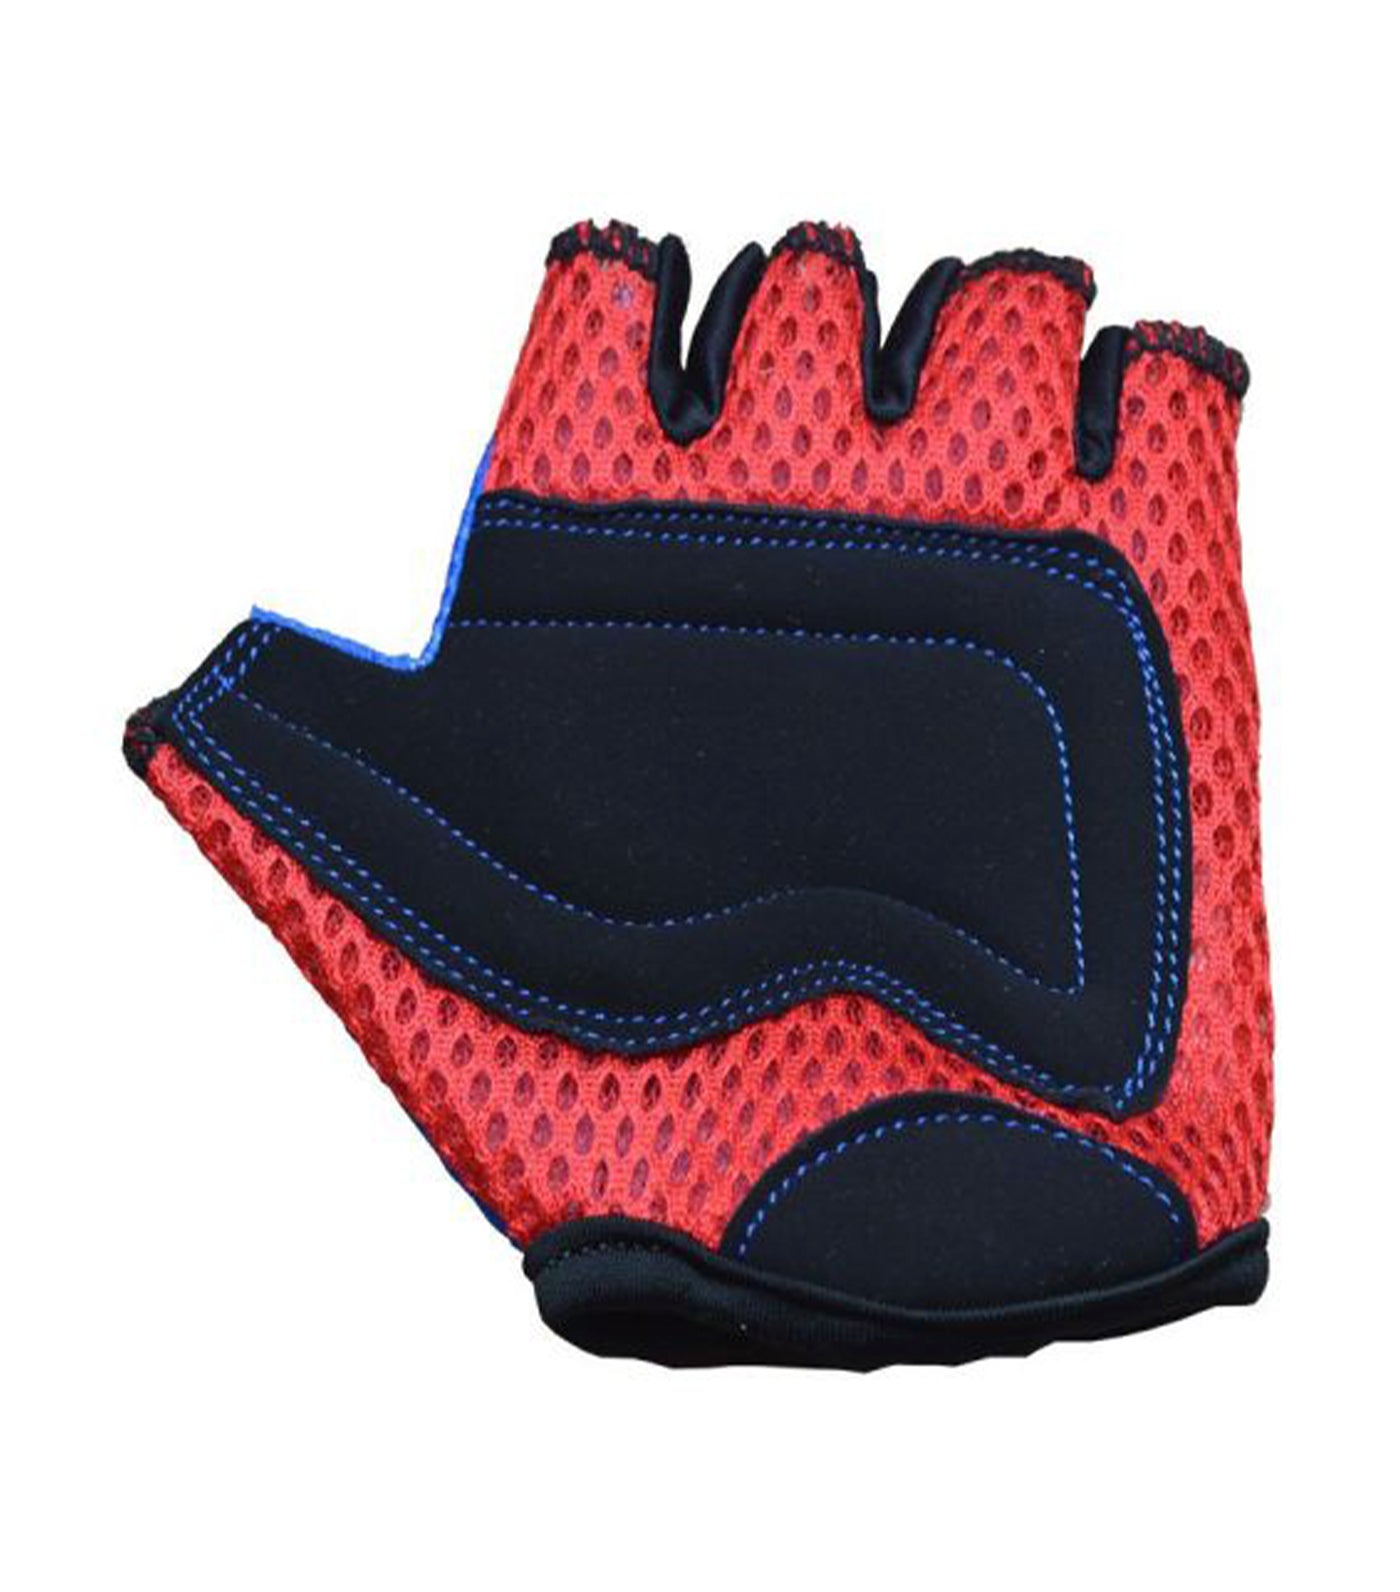 Kids Cycling Gloves - Blue